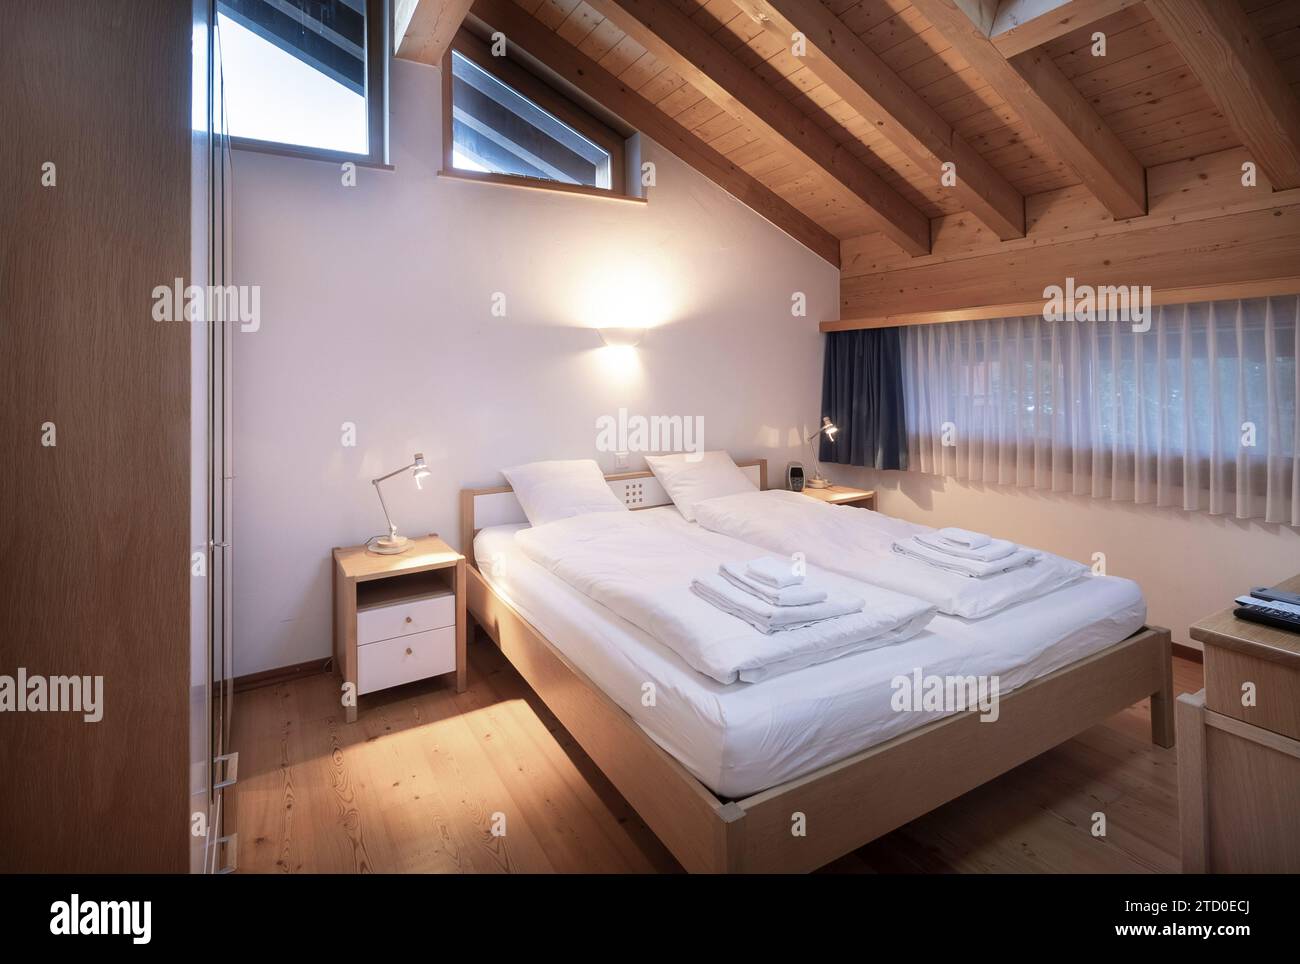 Modern and welcoming chalet bedroom interior featuring wooden beams, a comfortable double bed, and a warm lighting ambiance. Stock Photo